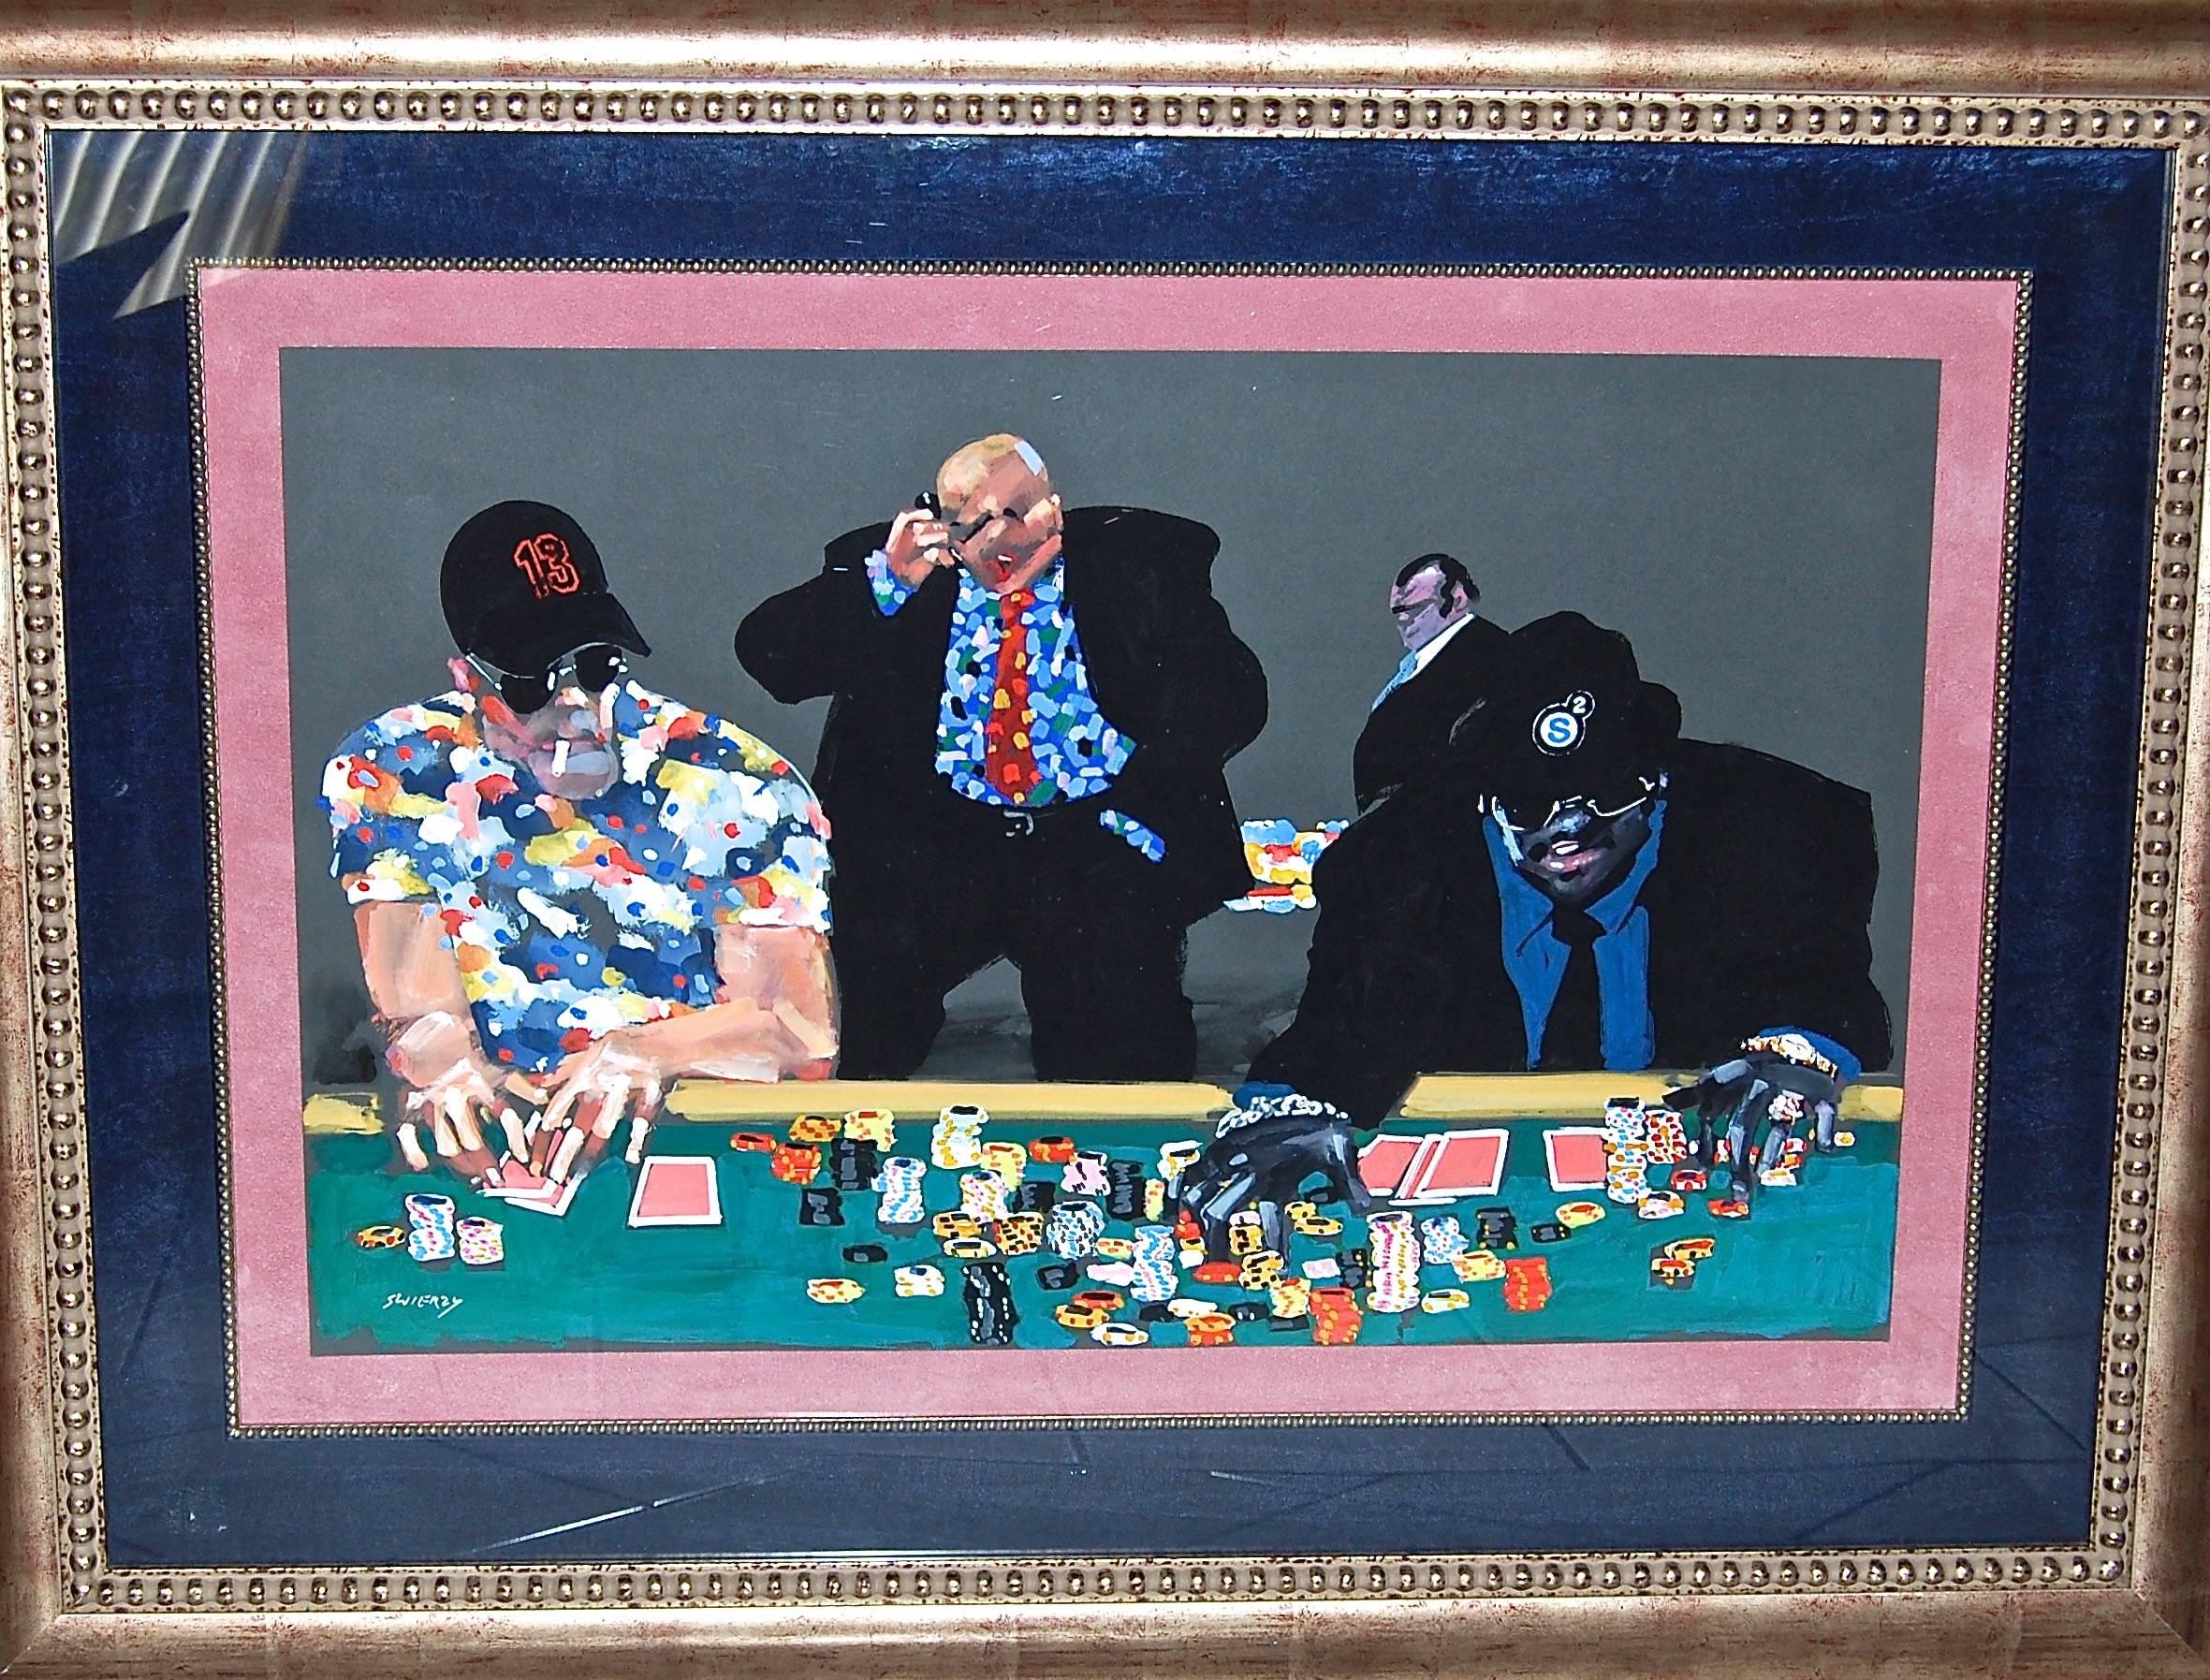 The Card Players - Painting by Waldemar Swierzy